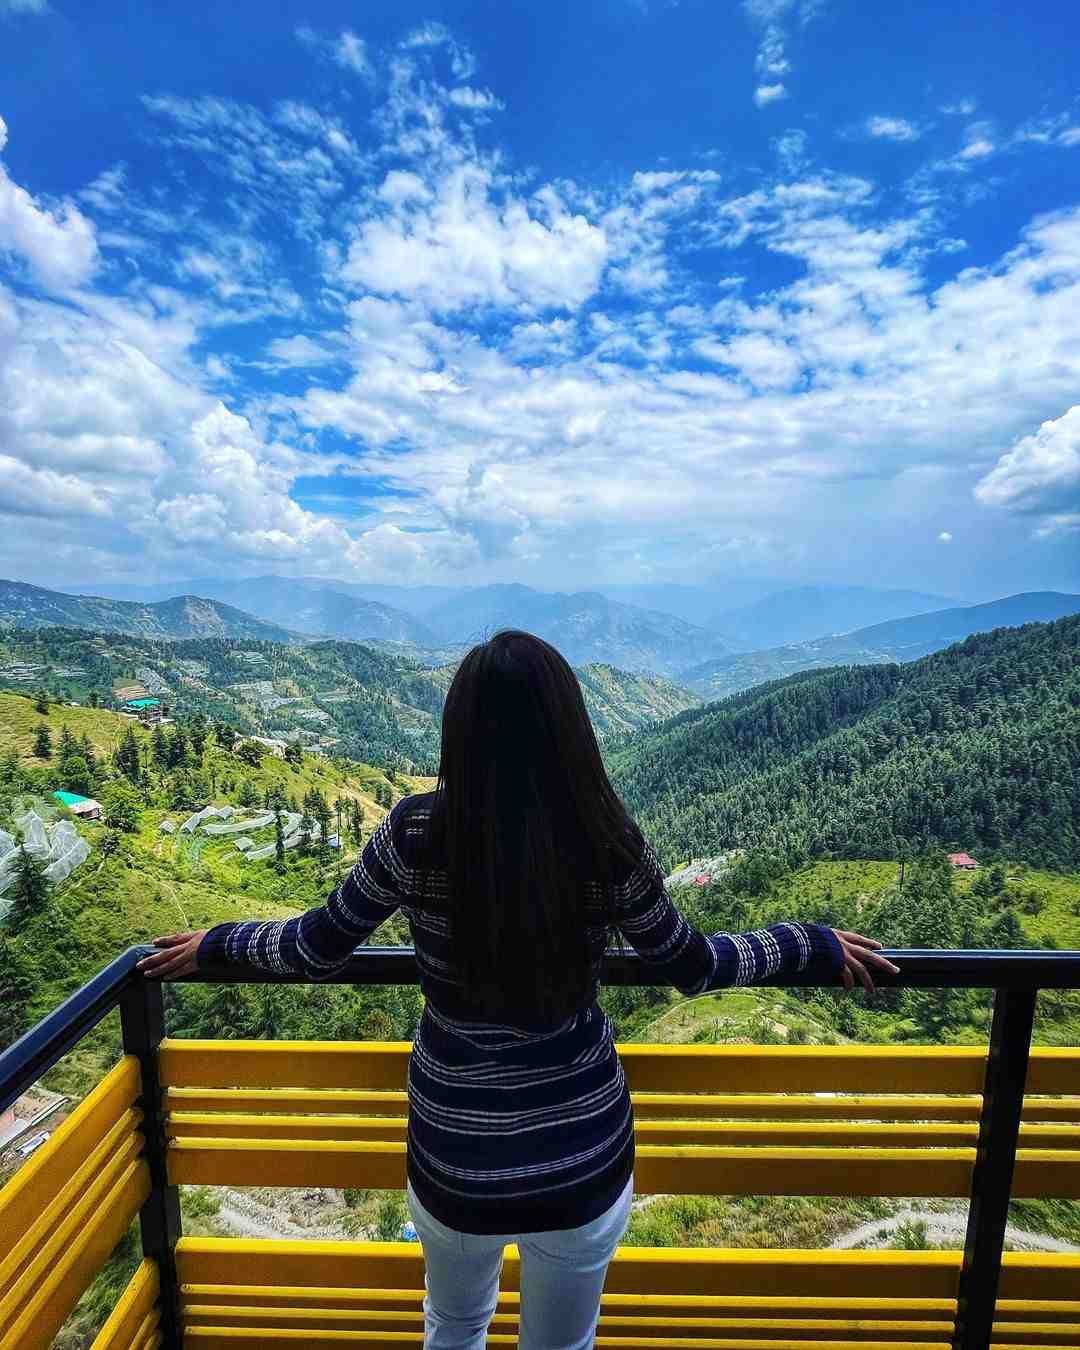 Best Places To Visit In Kufri In Hindi, Top 5 Places To Visit In Kufri In Hindi, Kufri Me Ghumne ki Jagah, Best Places To Visit in Kufri in hindi, Places To Visit In Kufri in Hindi, Best Tourist Places Kufri in Himachal pradesh in Hindi, Top 5 Places To Visit In Kufri, Best Places To Visit In Kufri In Hindi, Kufri Tourism Places Images, kufri tourist places photos